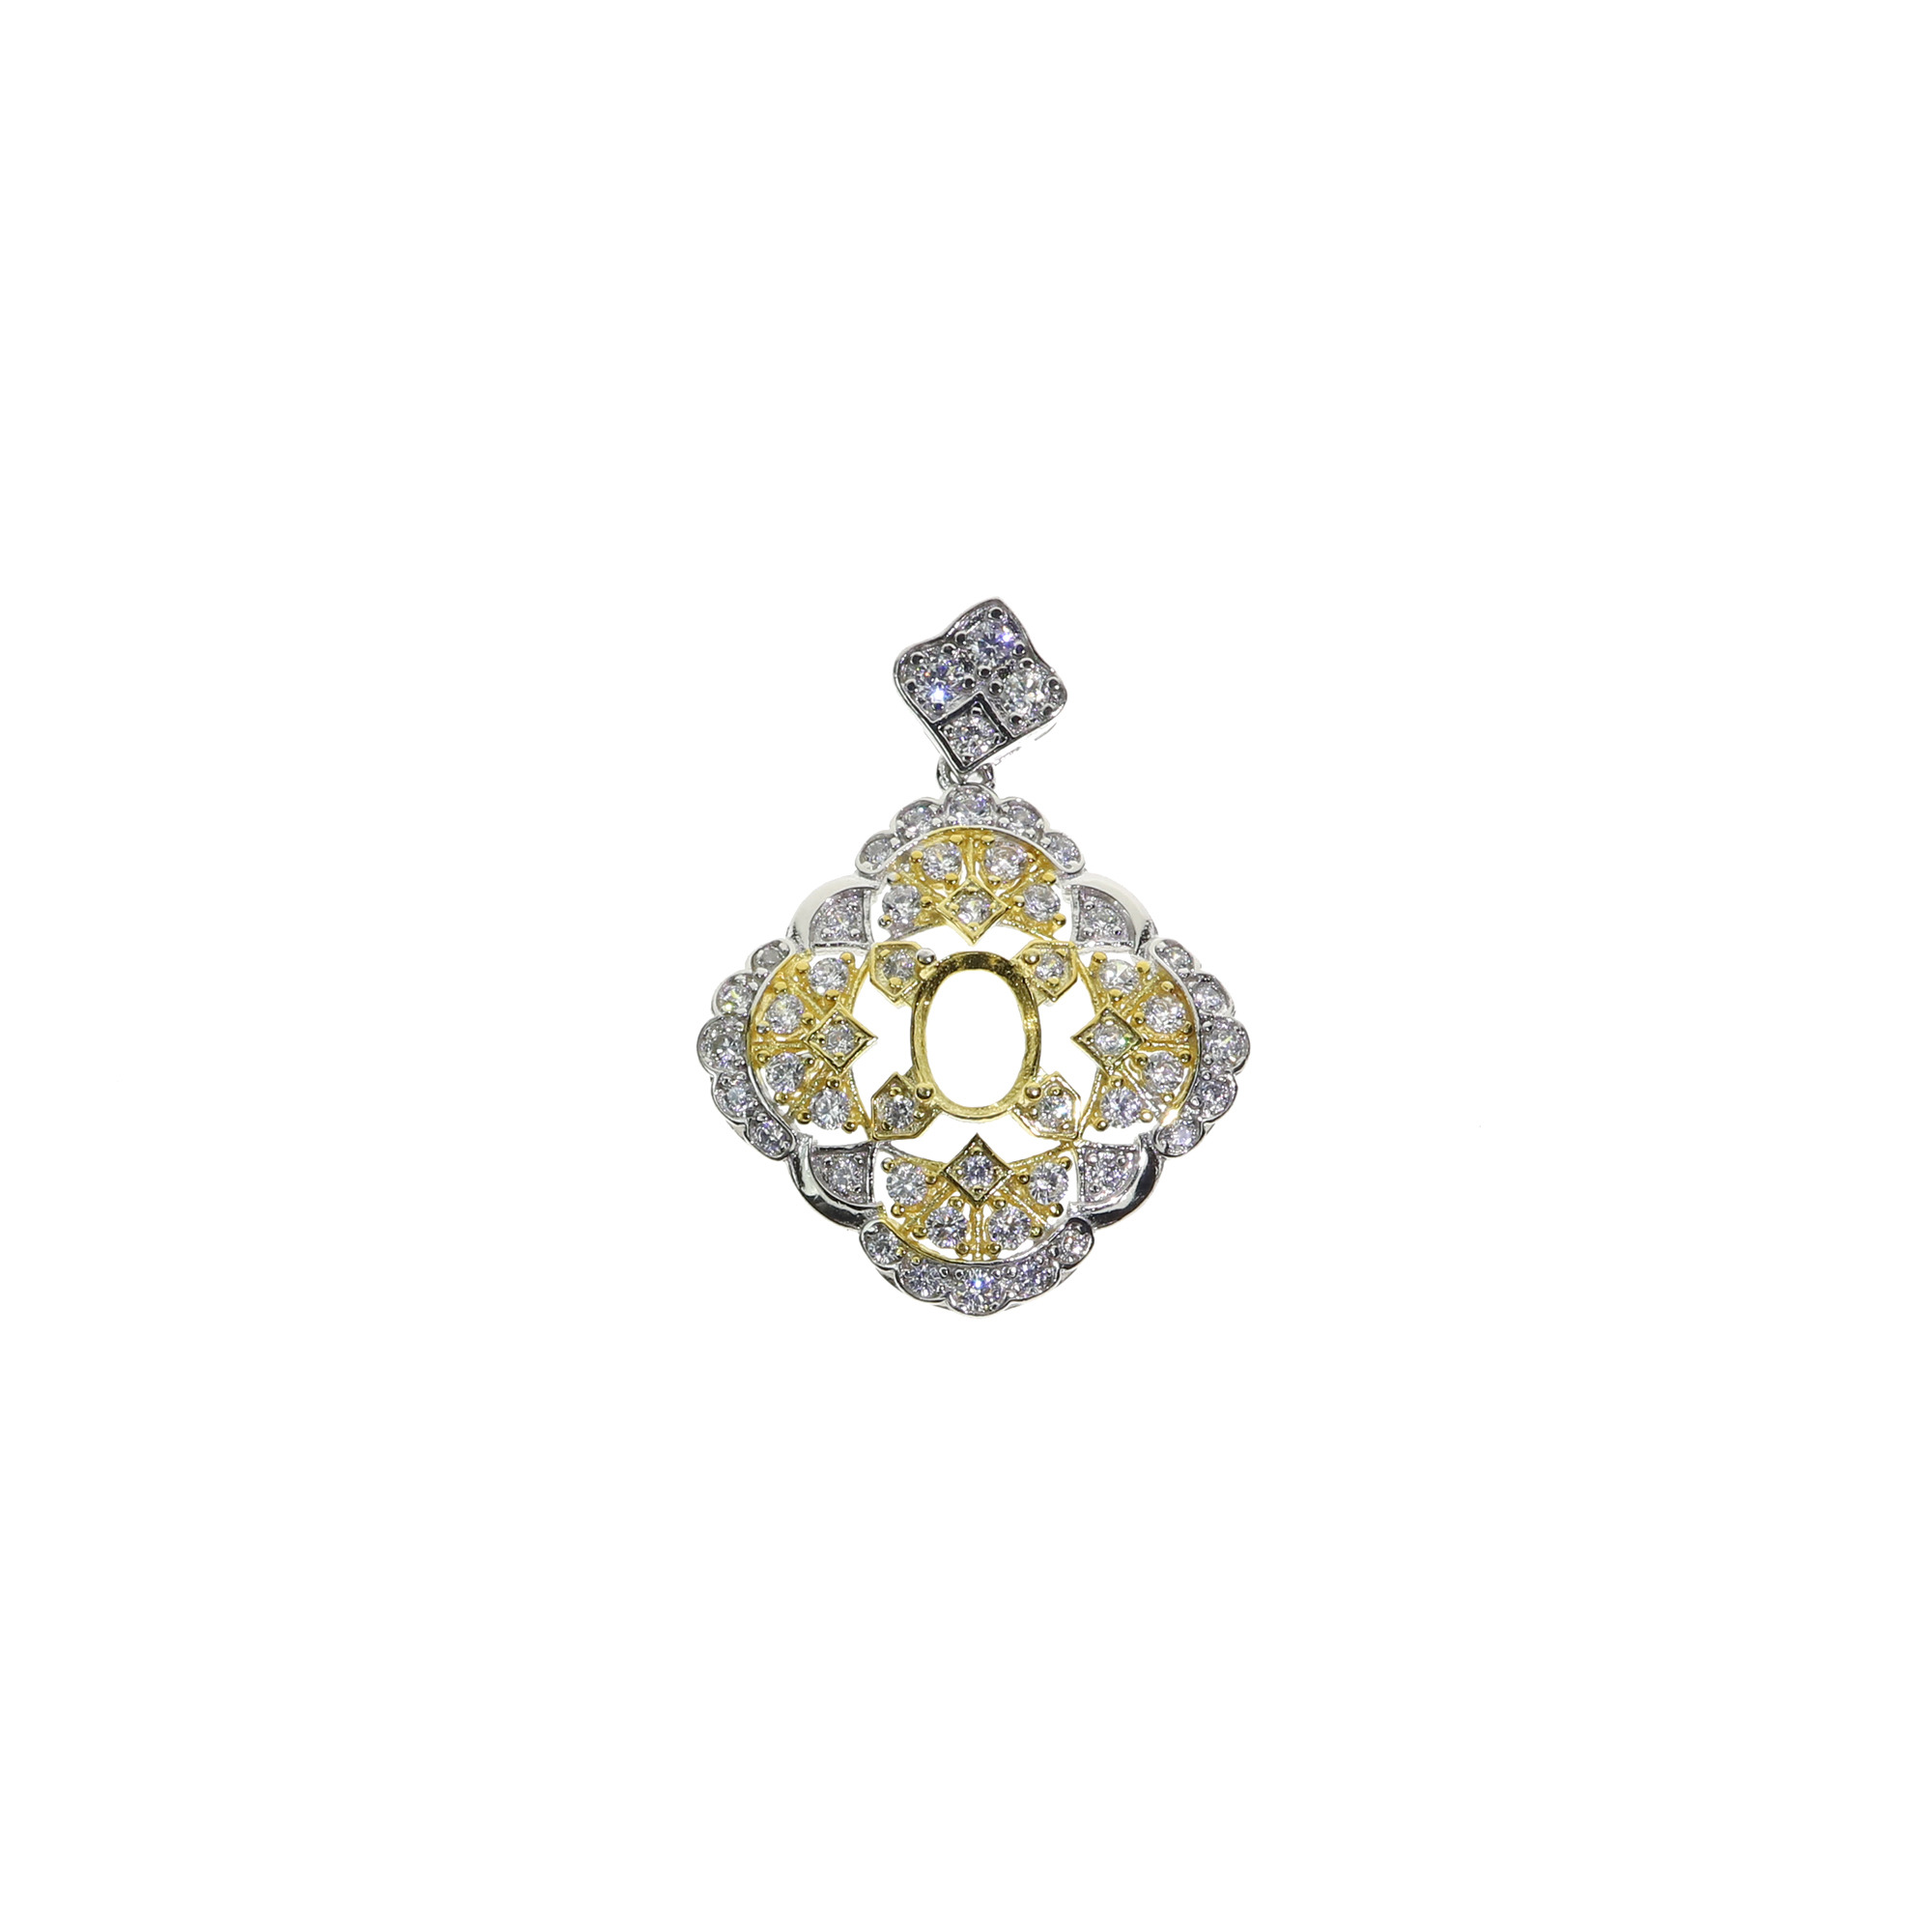 1Pcs 5X7MM Oval Bezel Gold Plated Pave Flower Vintage Style Solid 925 Sterling Silver Pendant Settings DIY Gemstone Jewelry Supplies 1421111 - Click Image to Close